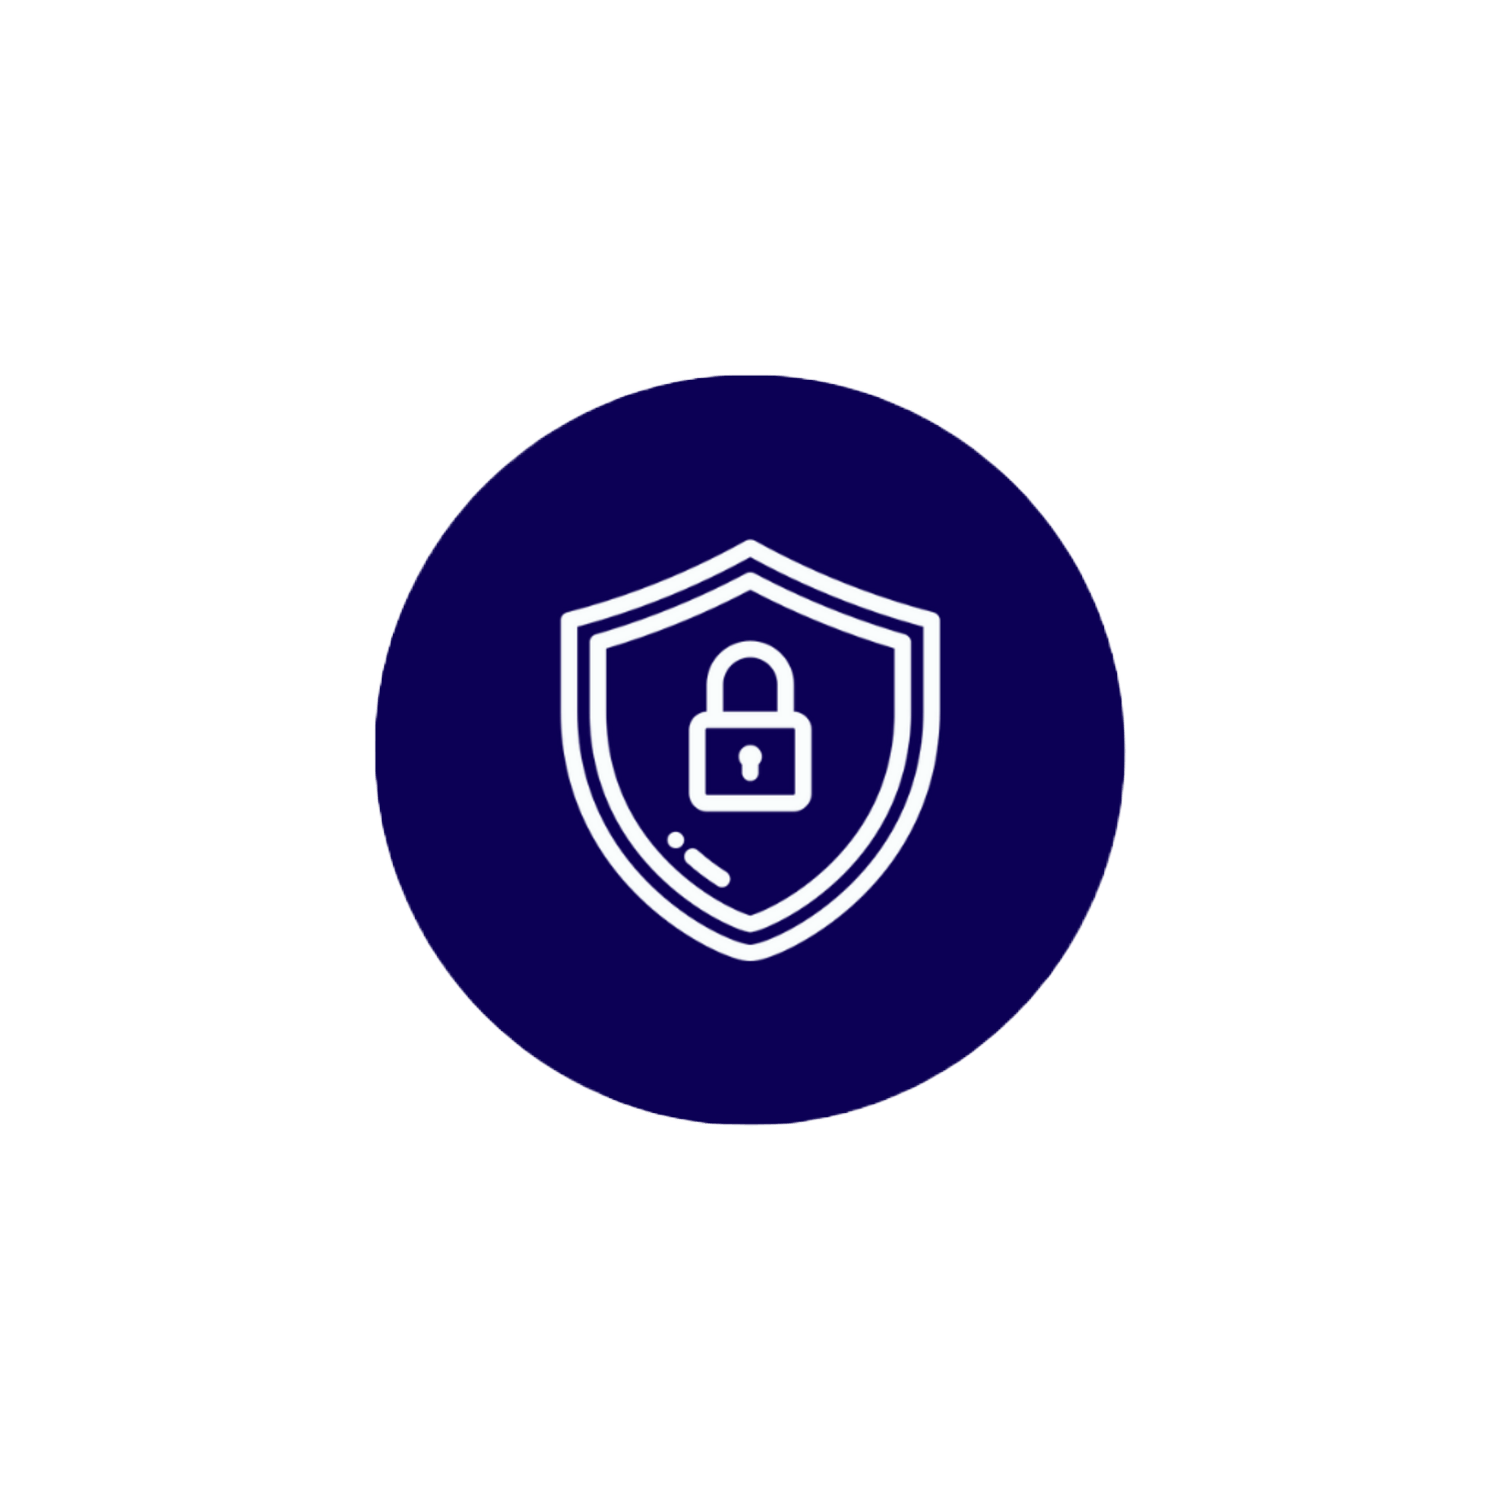 Data privacy & security concerns icon